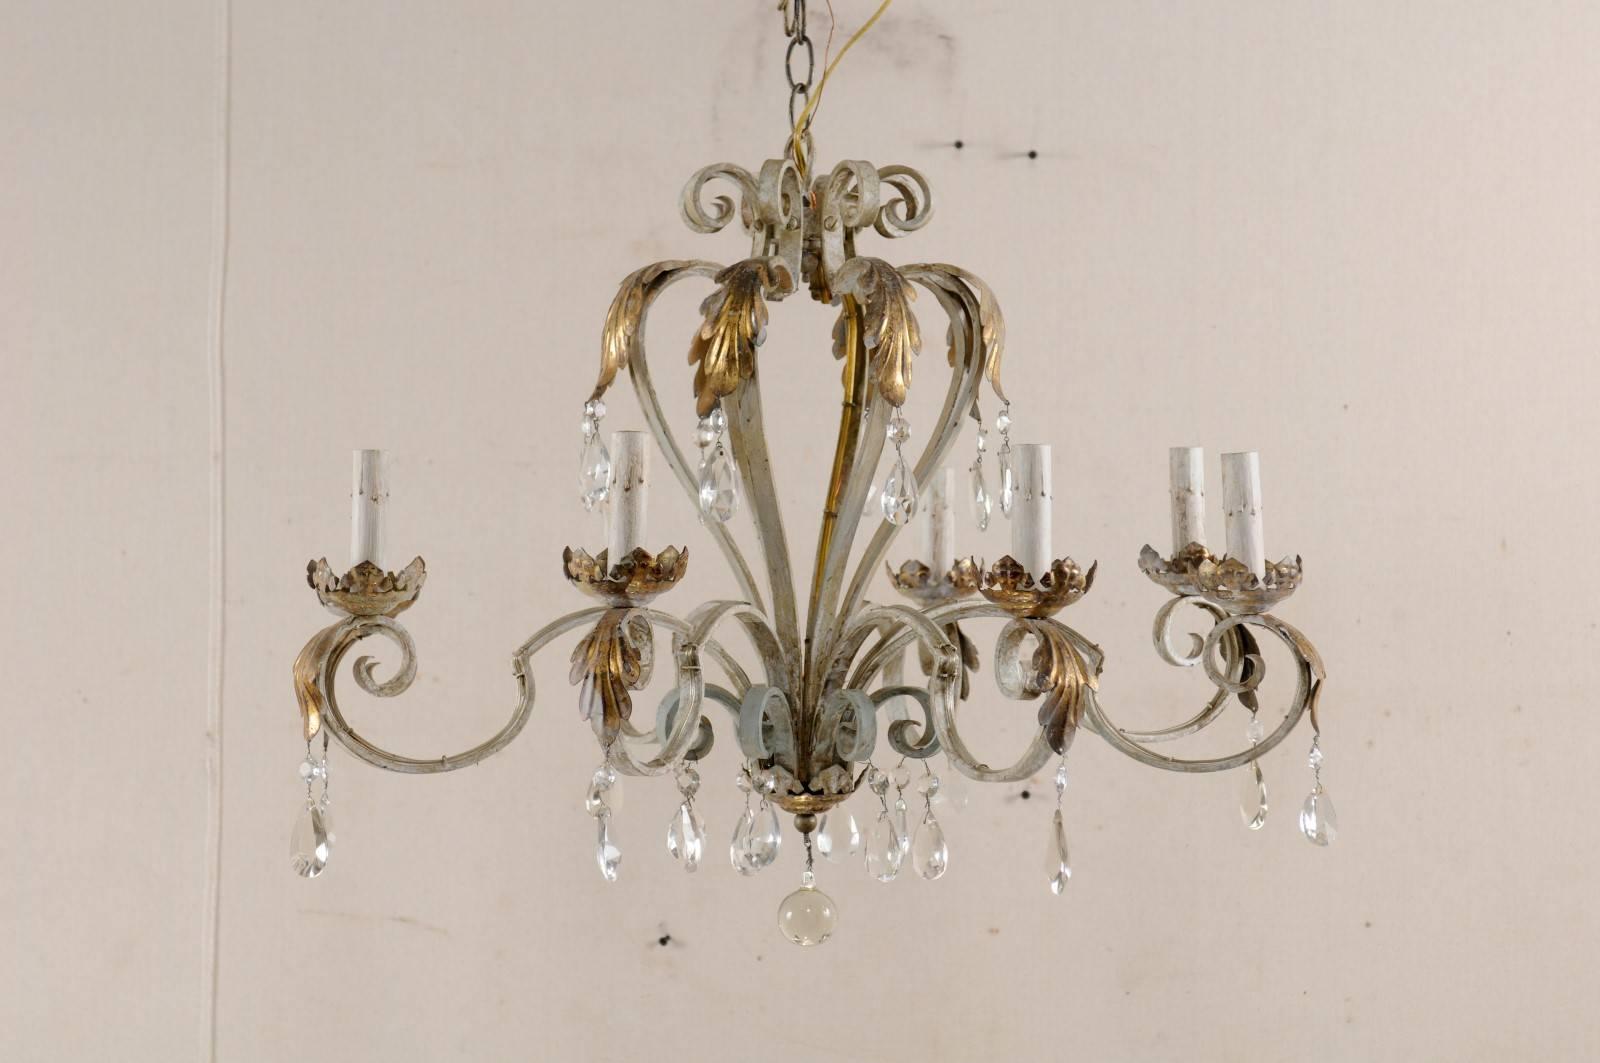 A French vintage eight-light painted iron and crystal chandelier. This French iron chandelier from the mid-20th century features scrolling armature, adorned in an acanthus leaf motif, decorated with hanging crystals, and glass ball bottom finial.